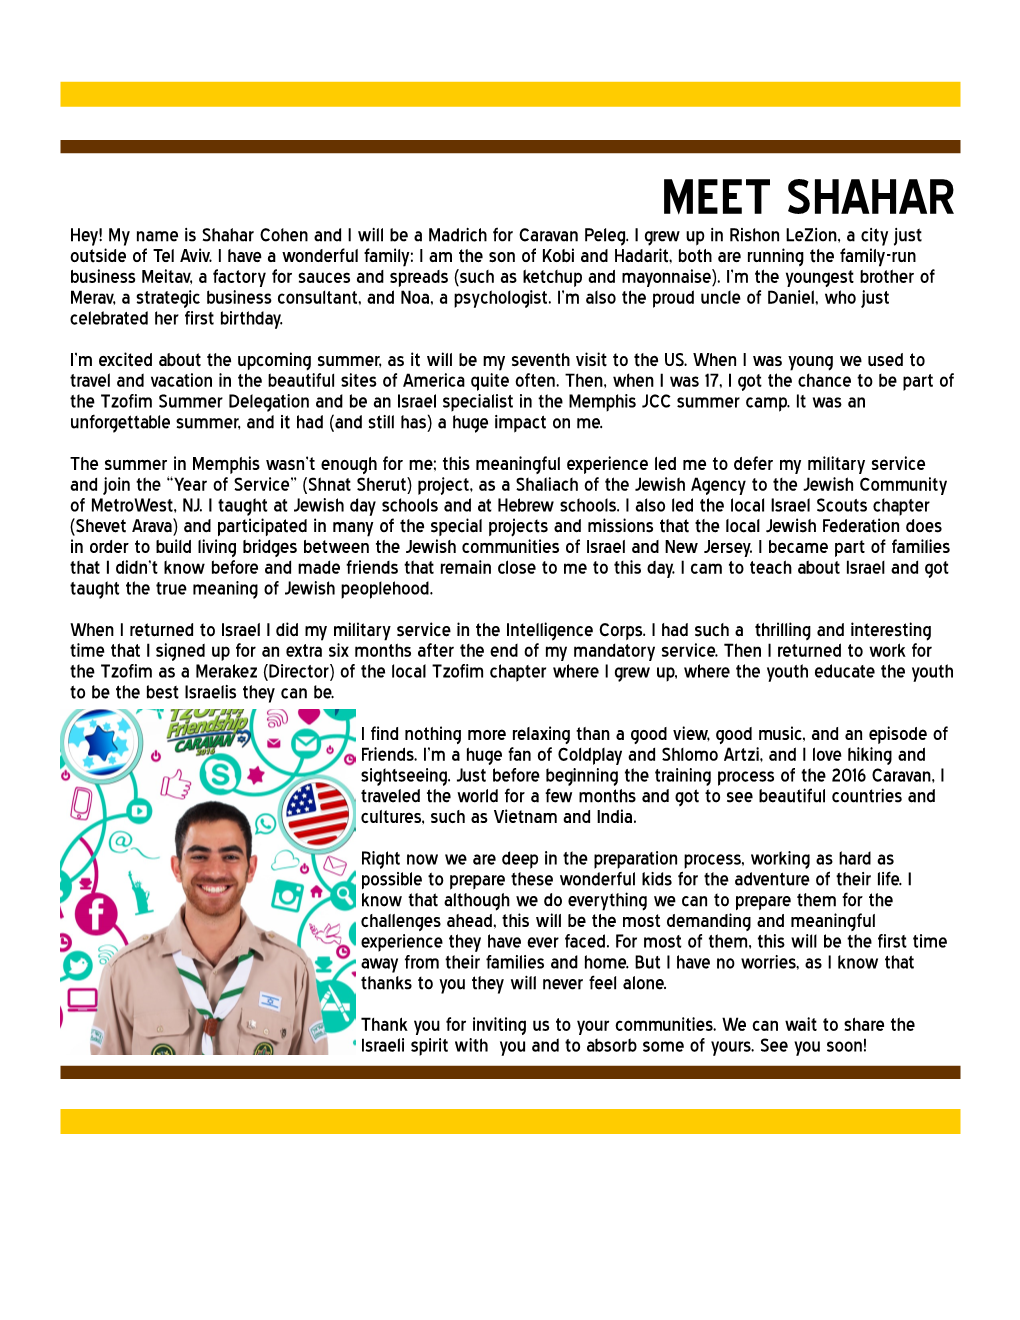 MEET SHAHAR Hey! My Name Is Shahar Cohen and I Will Be a Madrich for Caravan Peleg